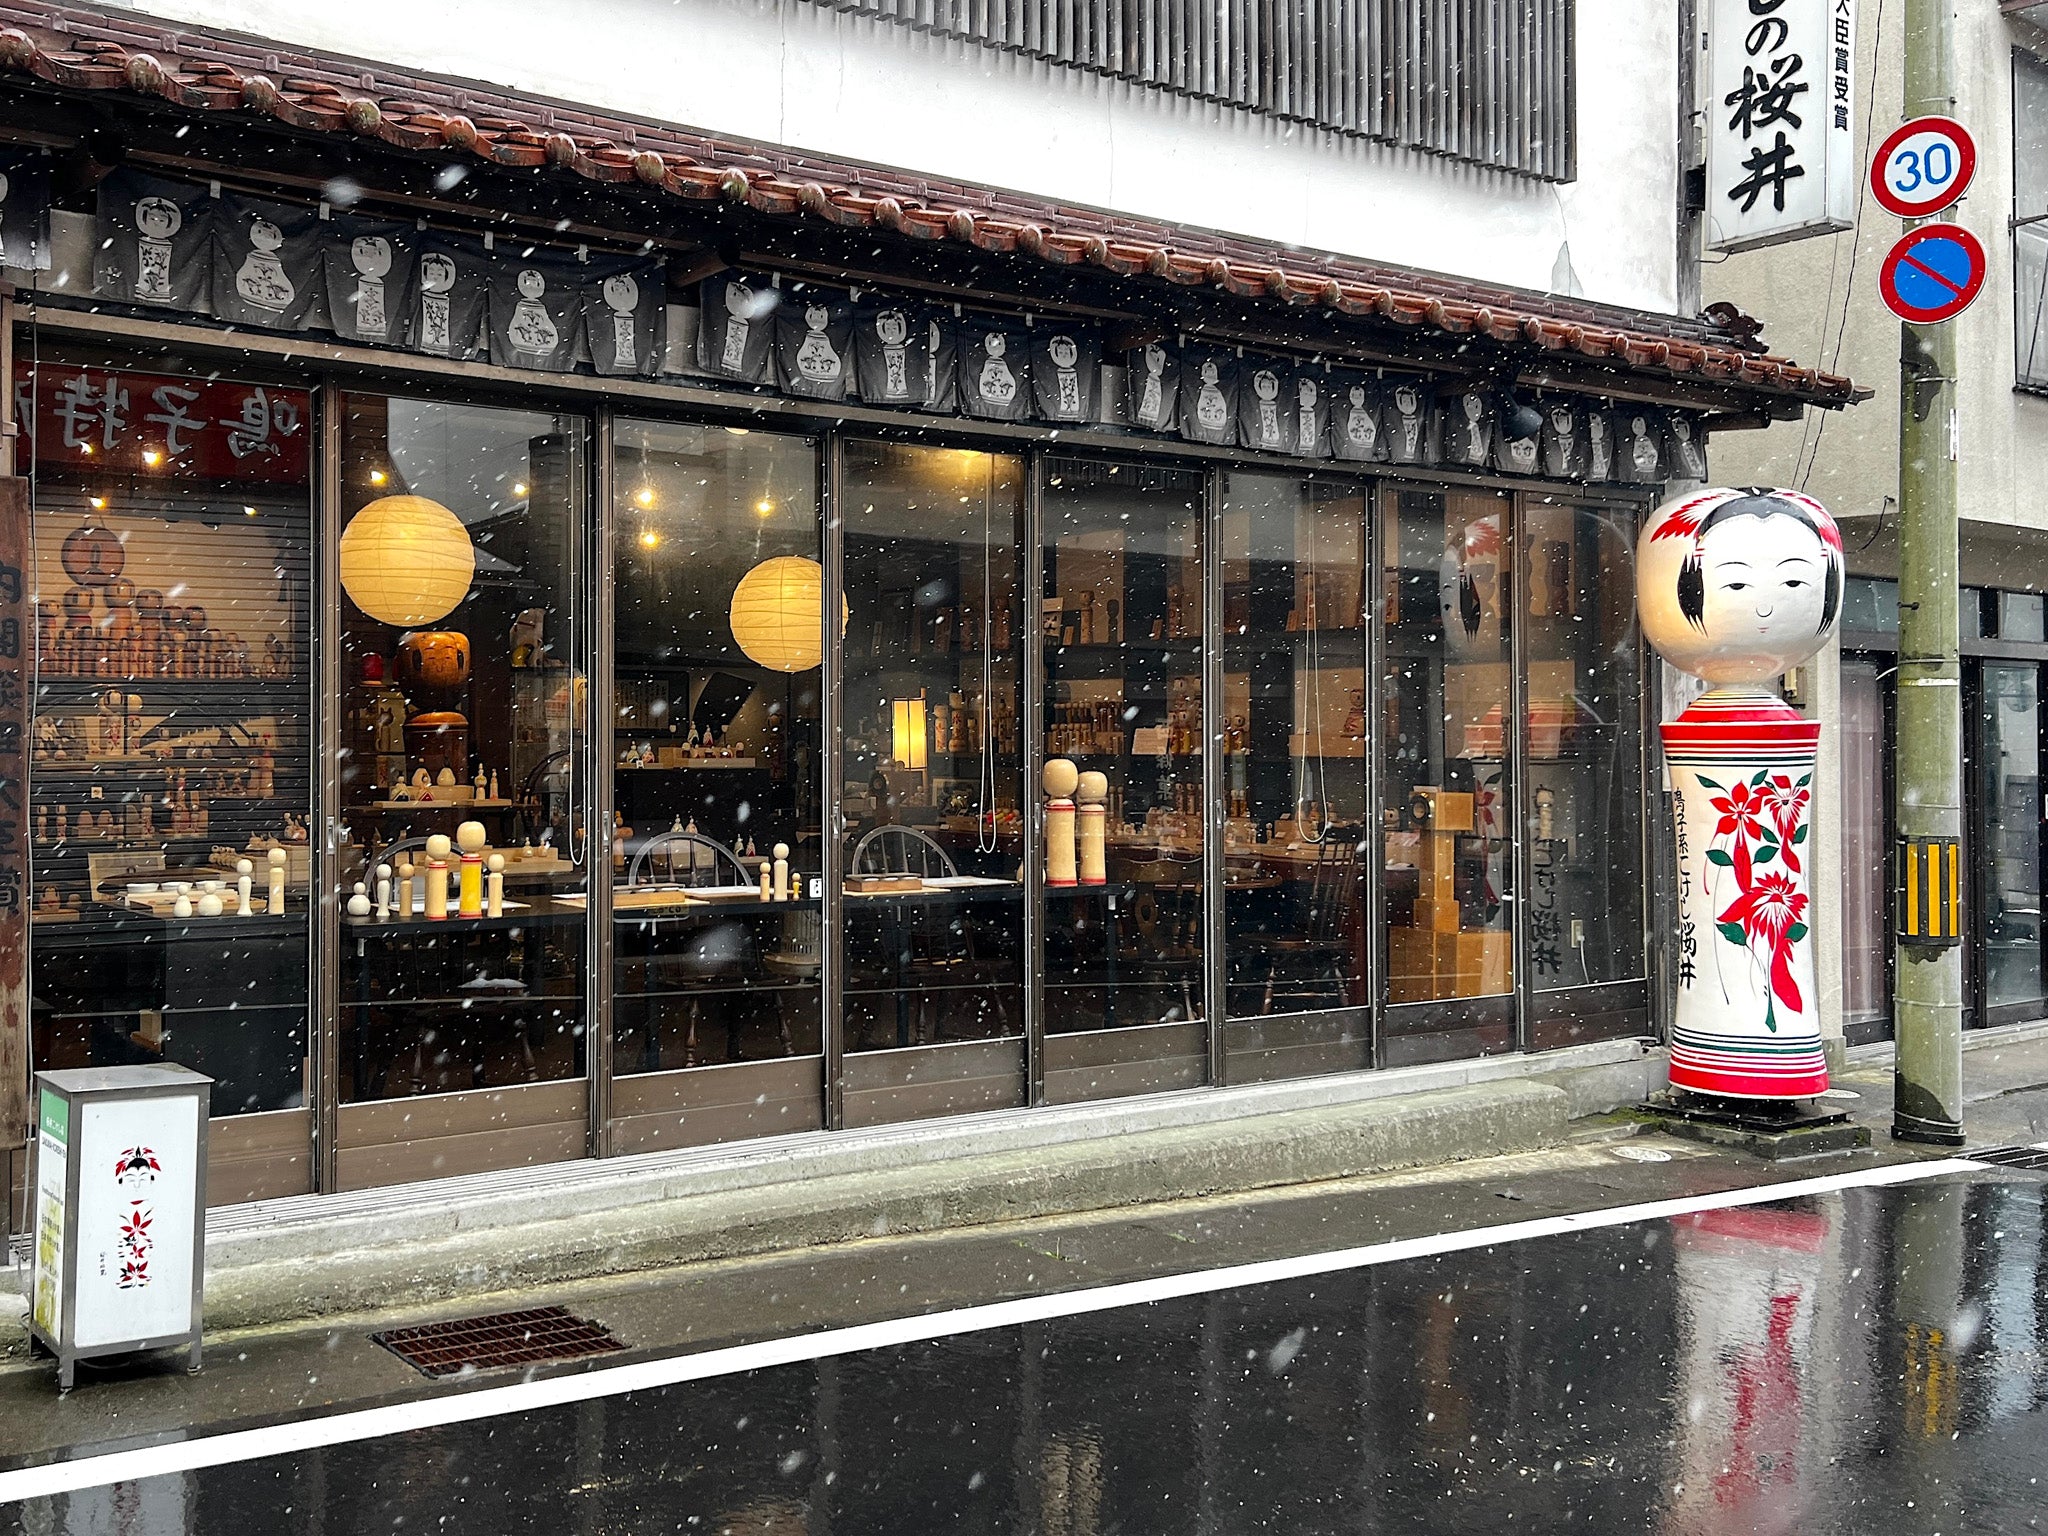 Naruko, a hot springs town in northern Japan that is kokeshi crazy!